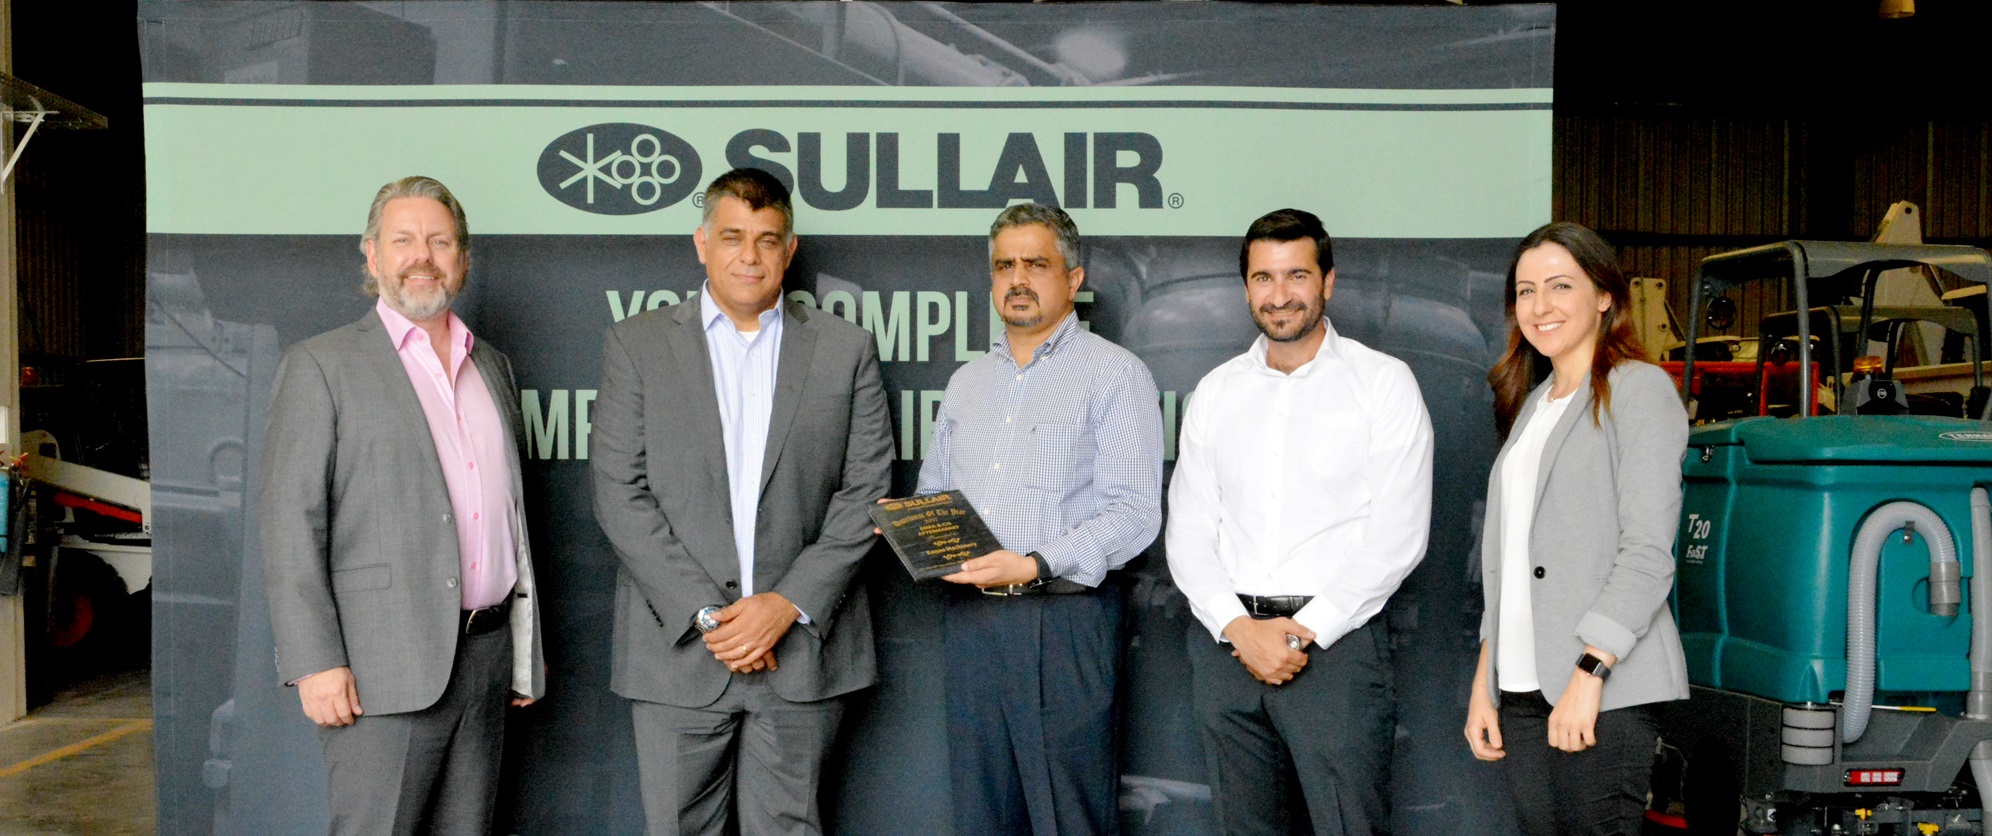 Sullair Distributor Of The Year